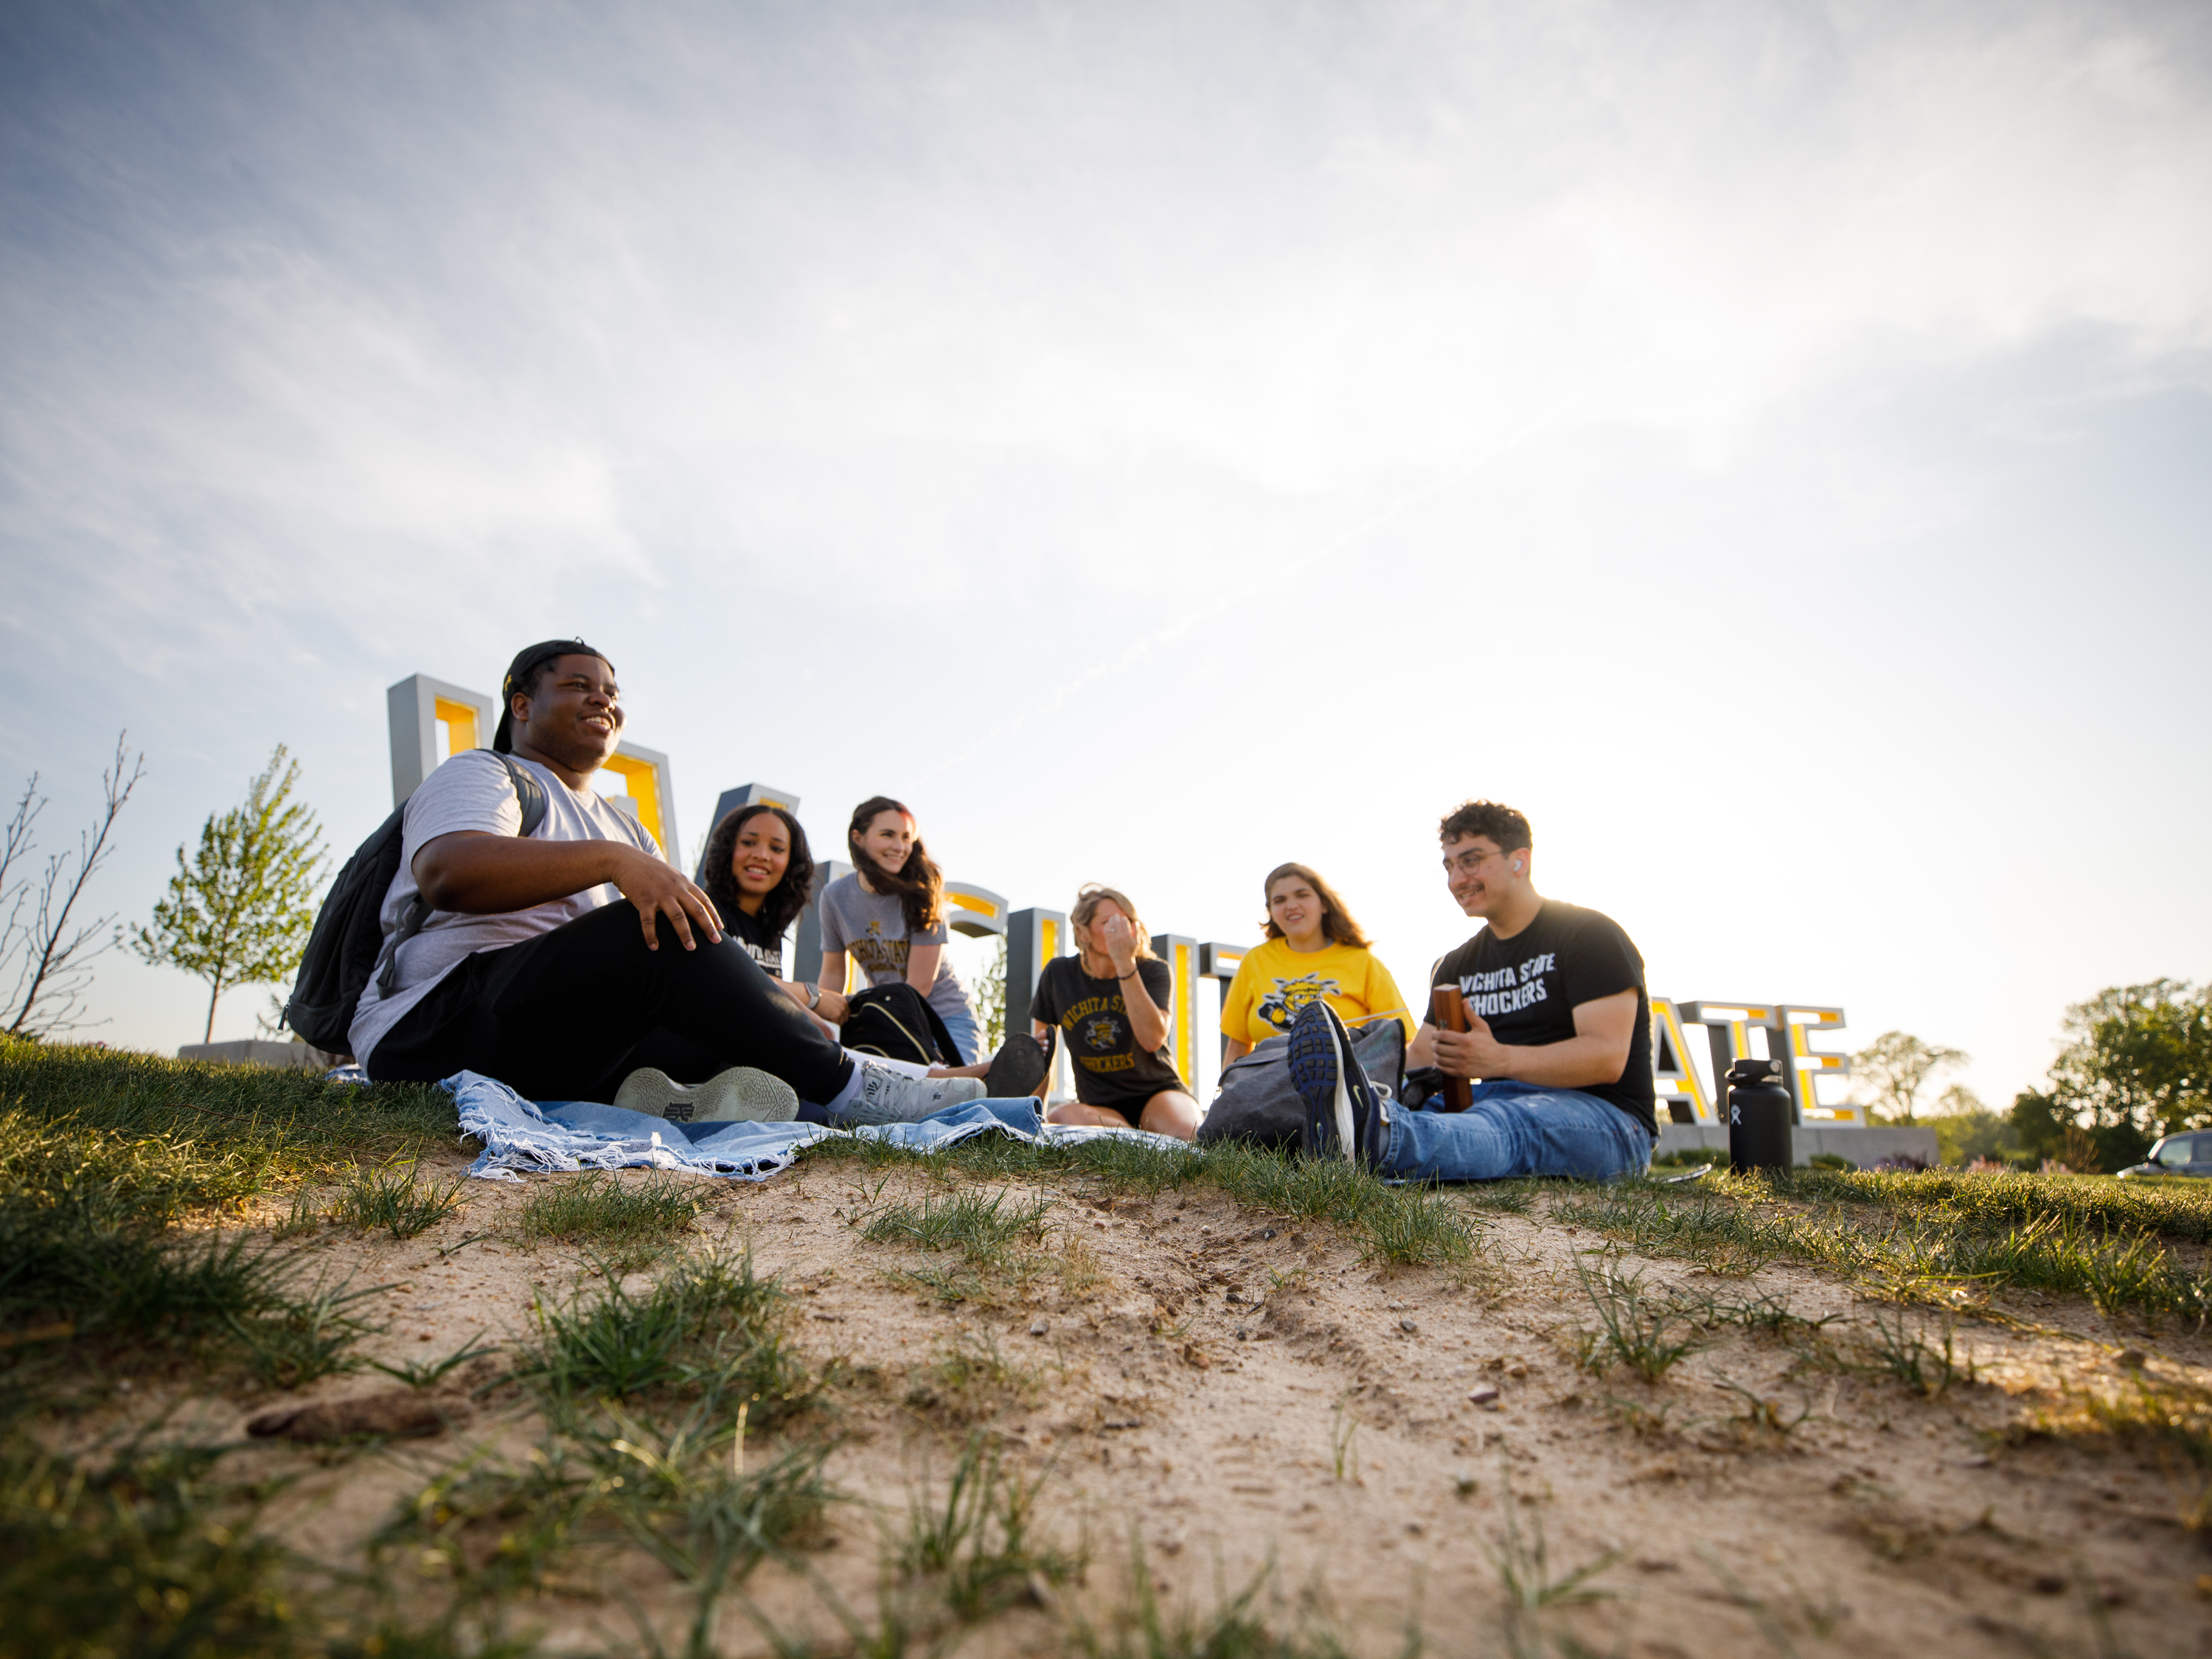 WSU students in front of the new Wichita State sign